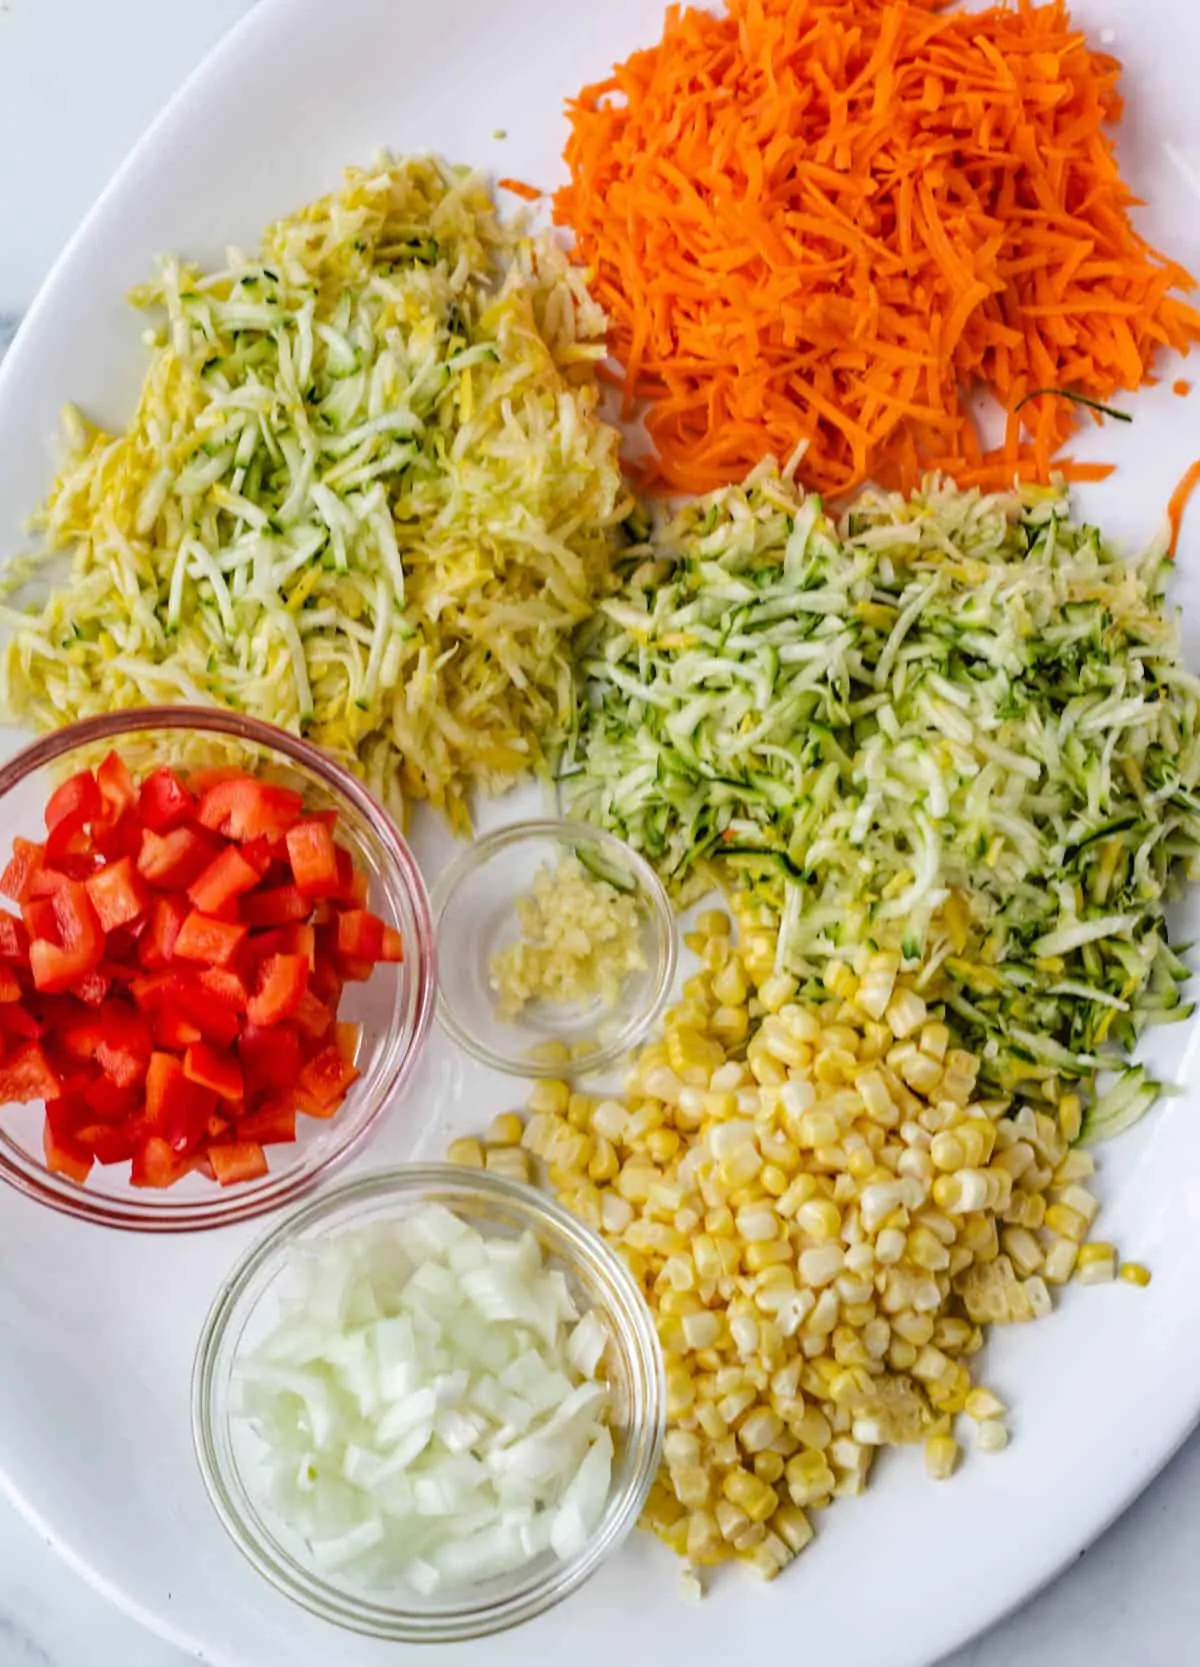 shredded carrot, zucchini, and squash, diced red pepper, and onion on white platter